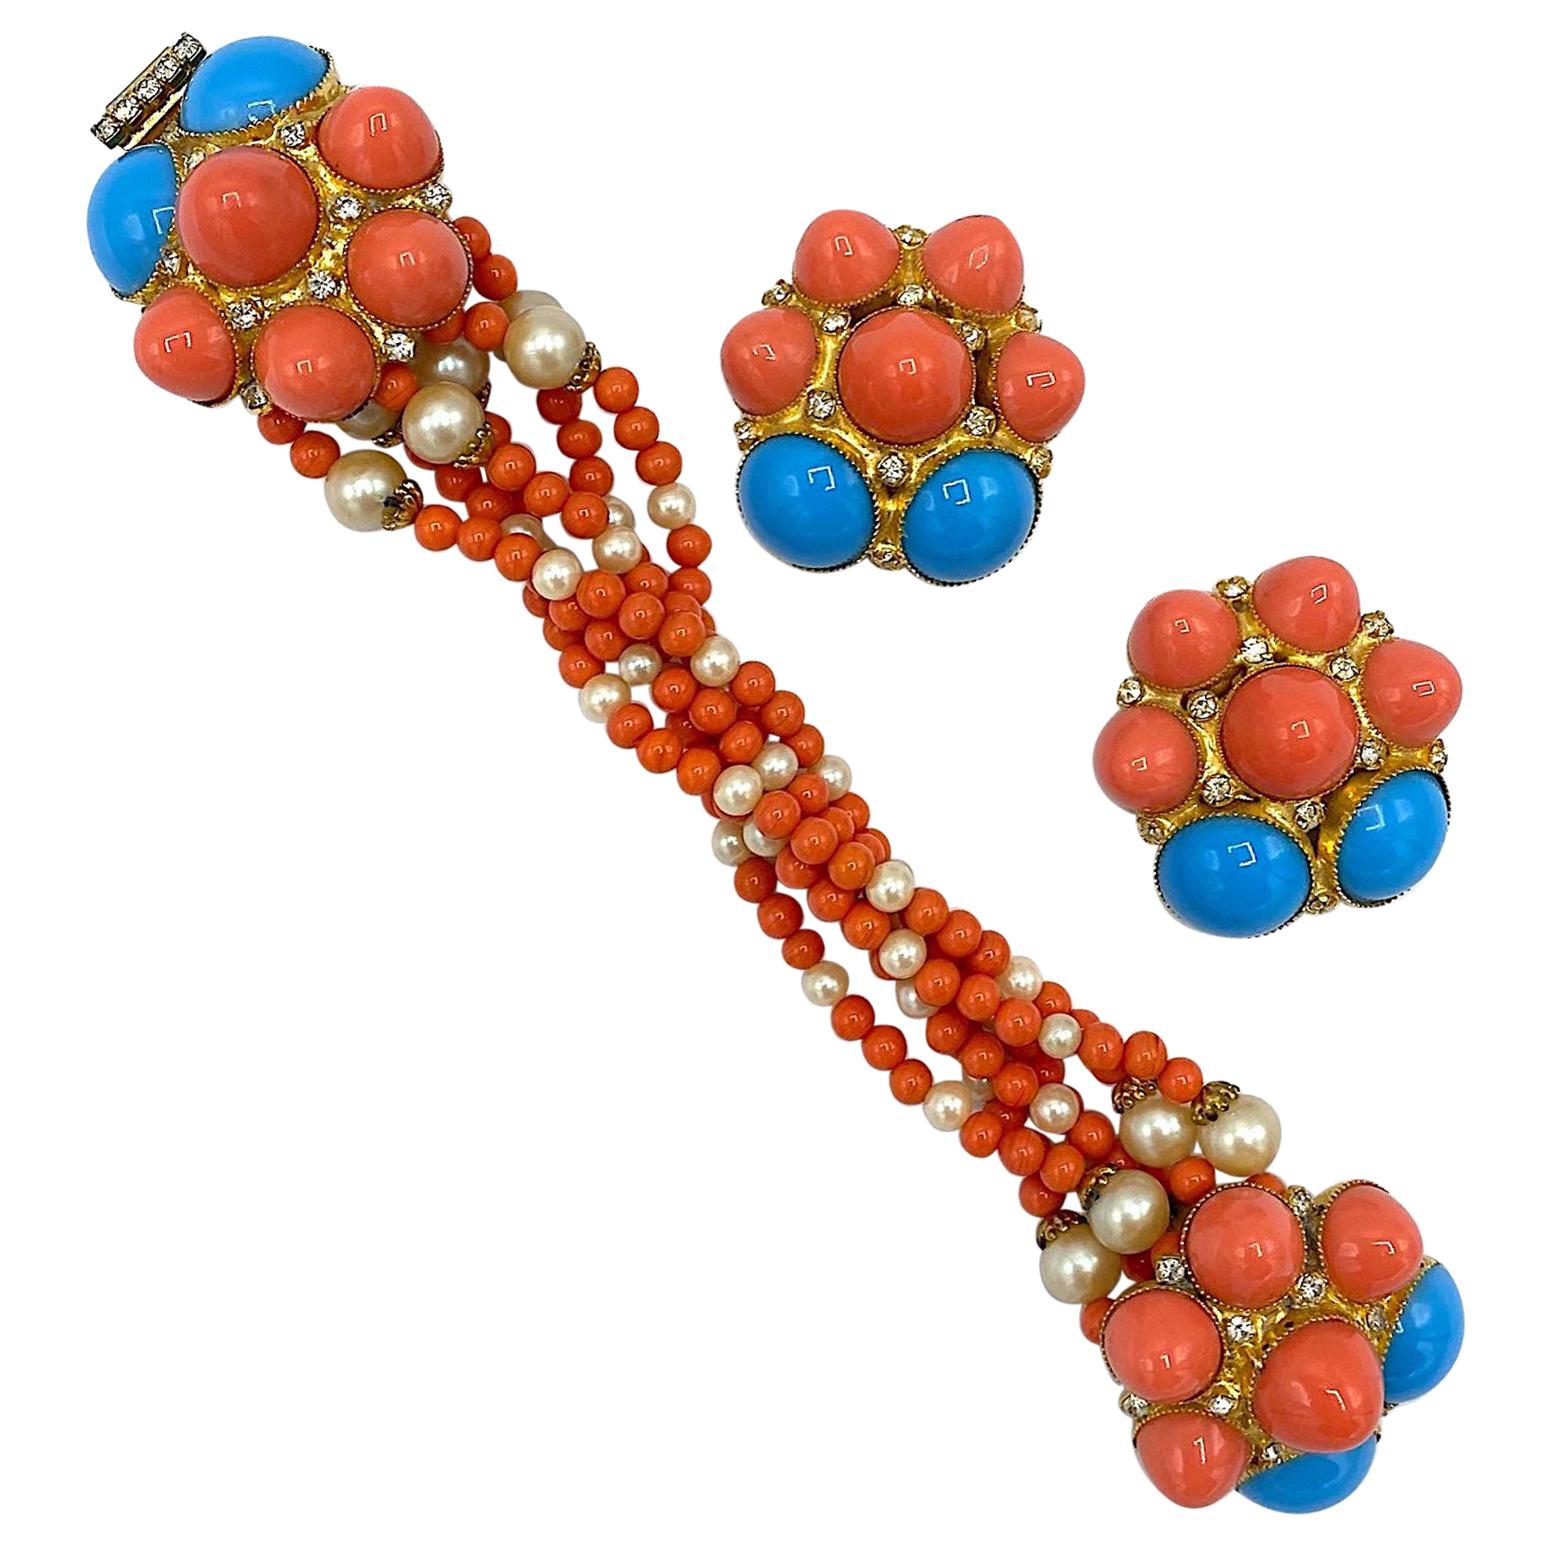 De Lillo 1970s Faux Coral & Turquoise Bracelet and Earrings